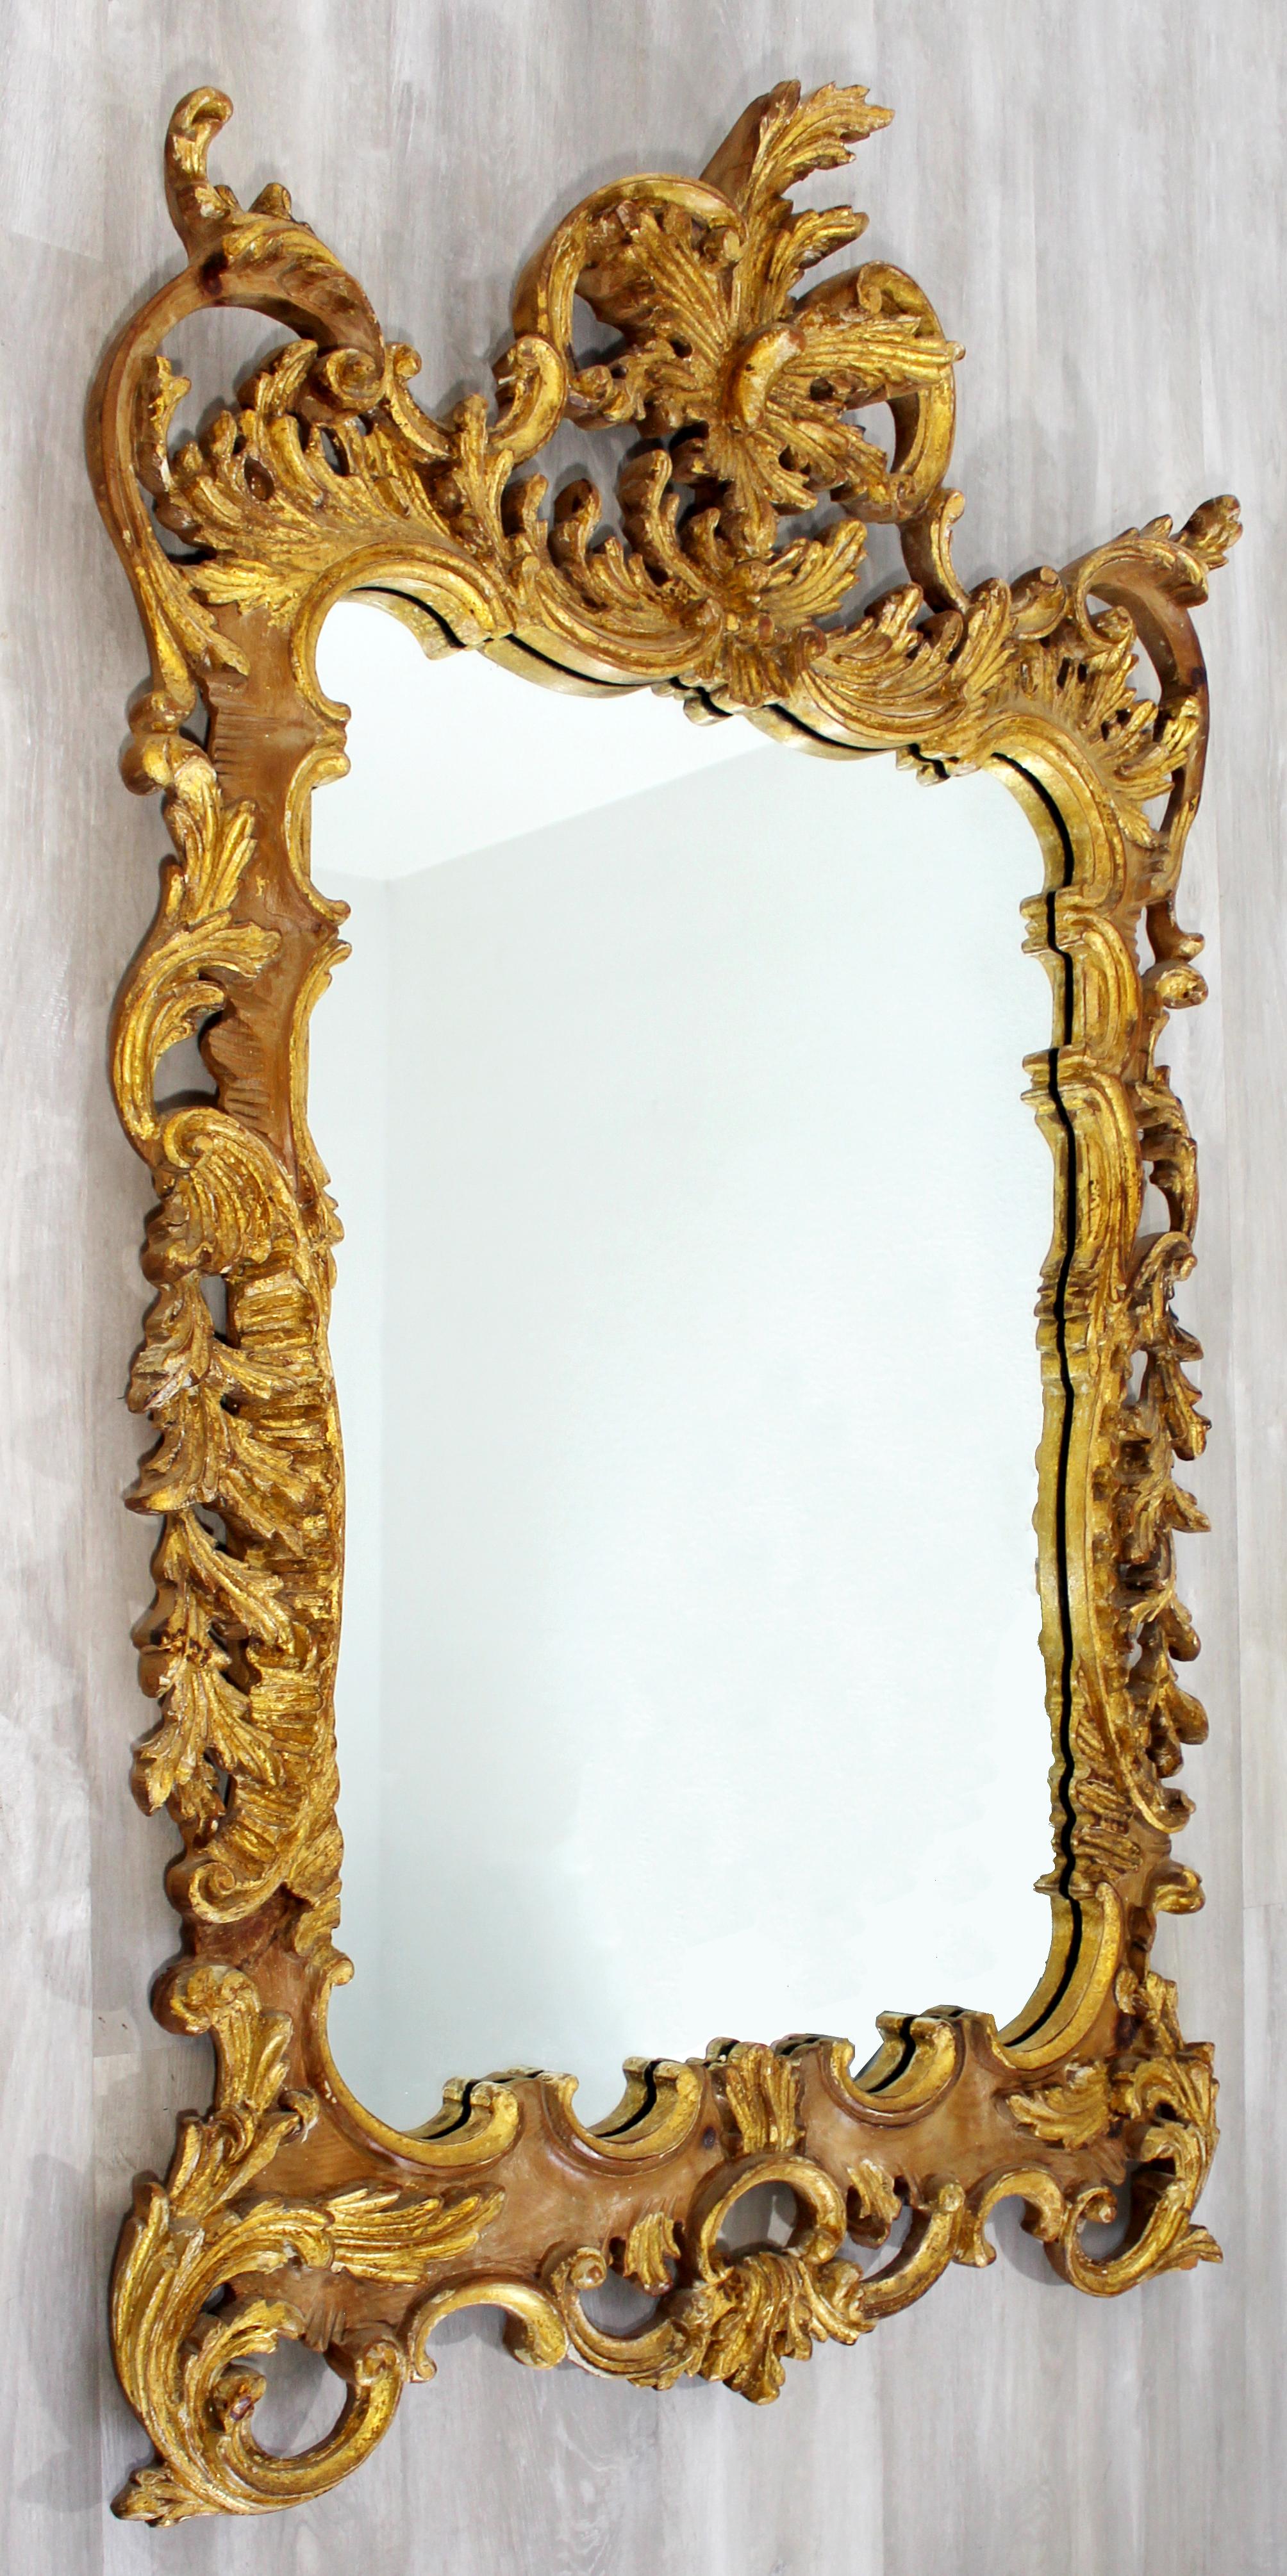 American Mid-Century Modern Large La Barge Chippendale Rococo Gold Gilt Mirror